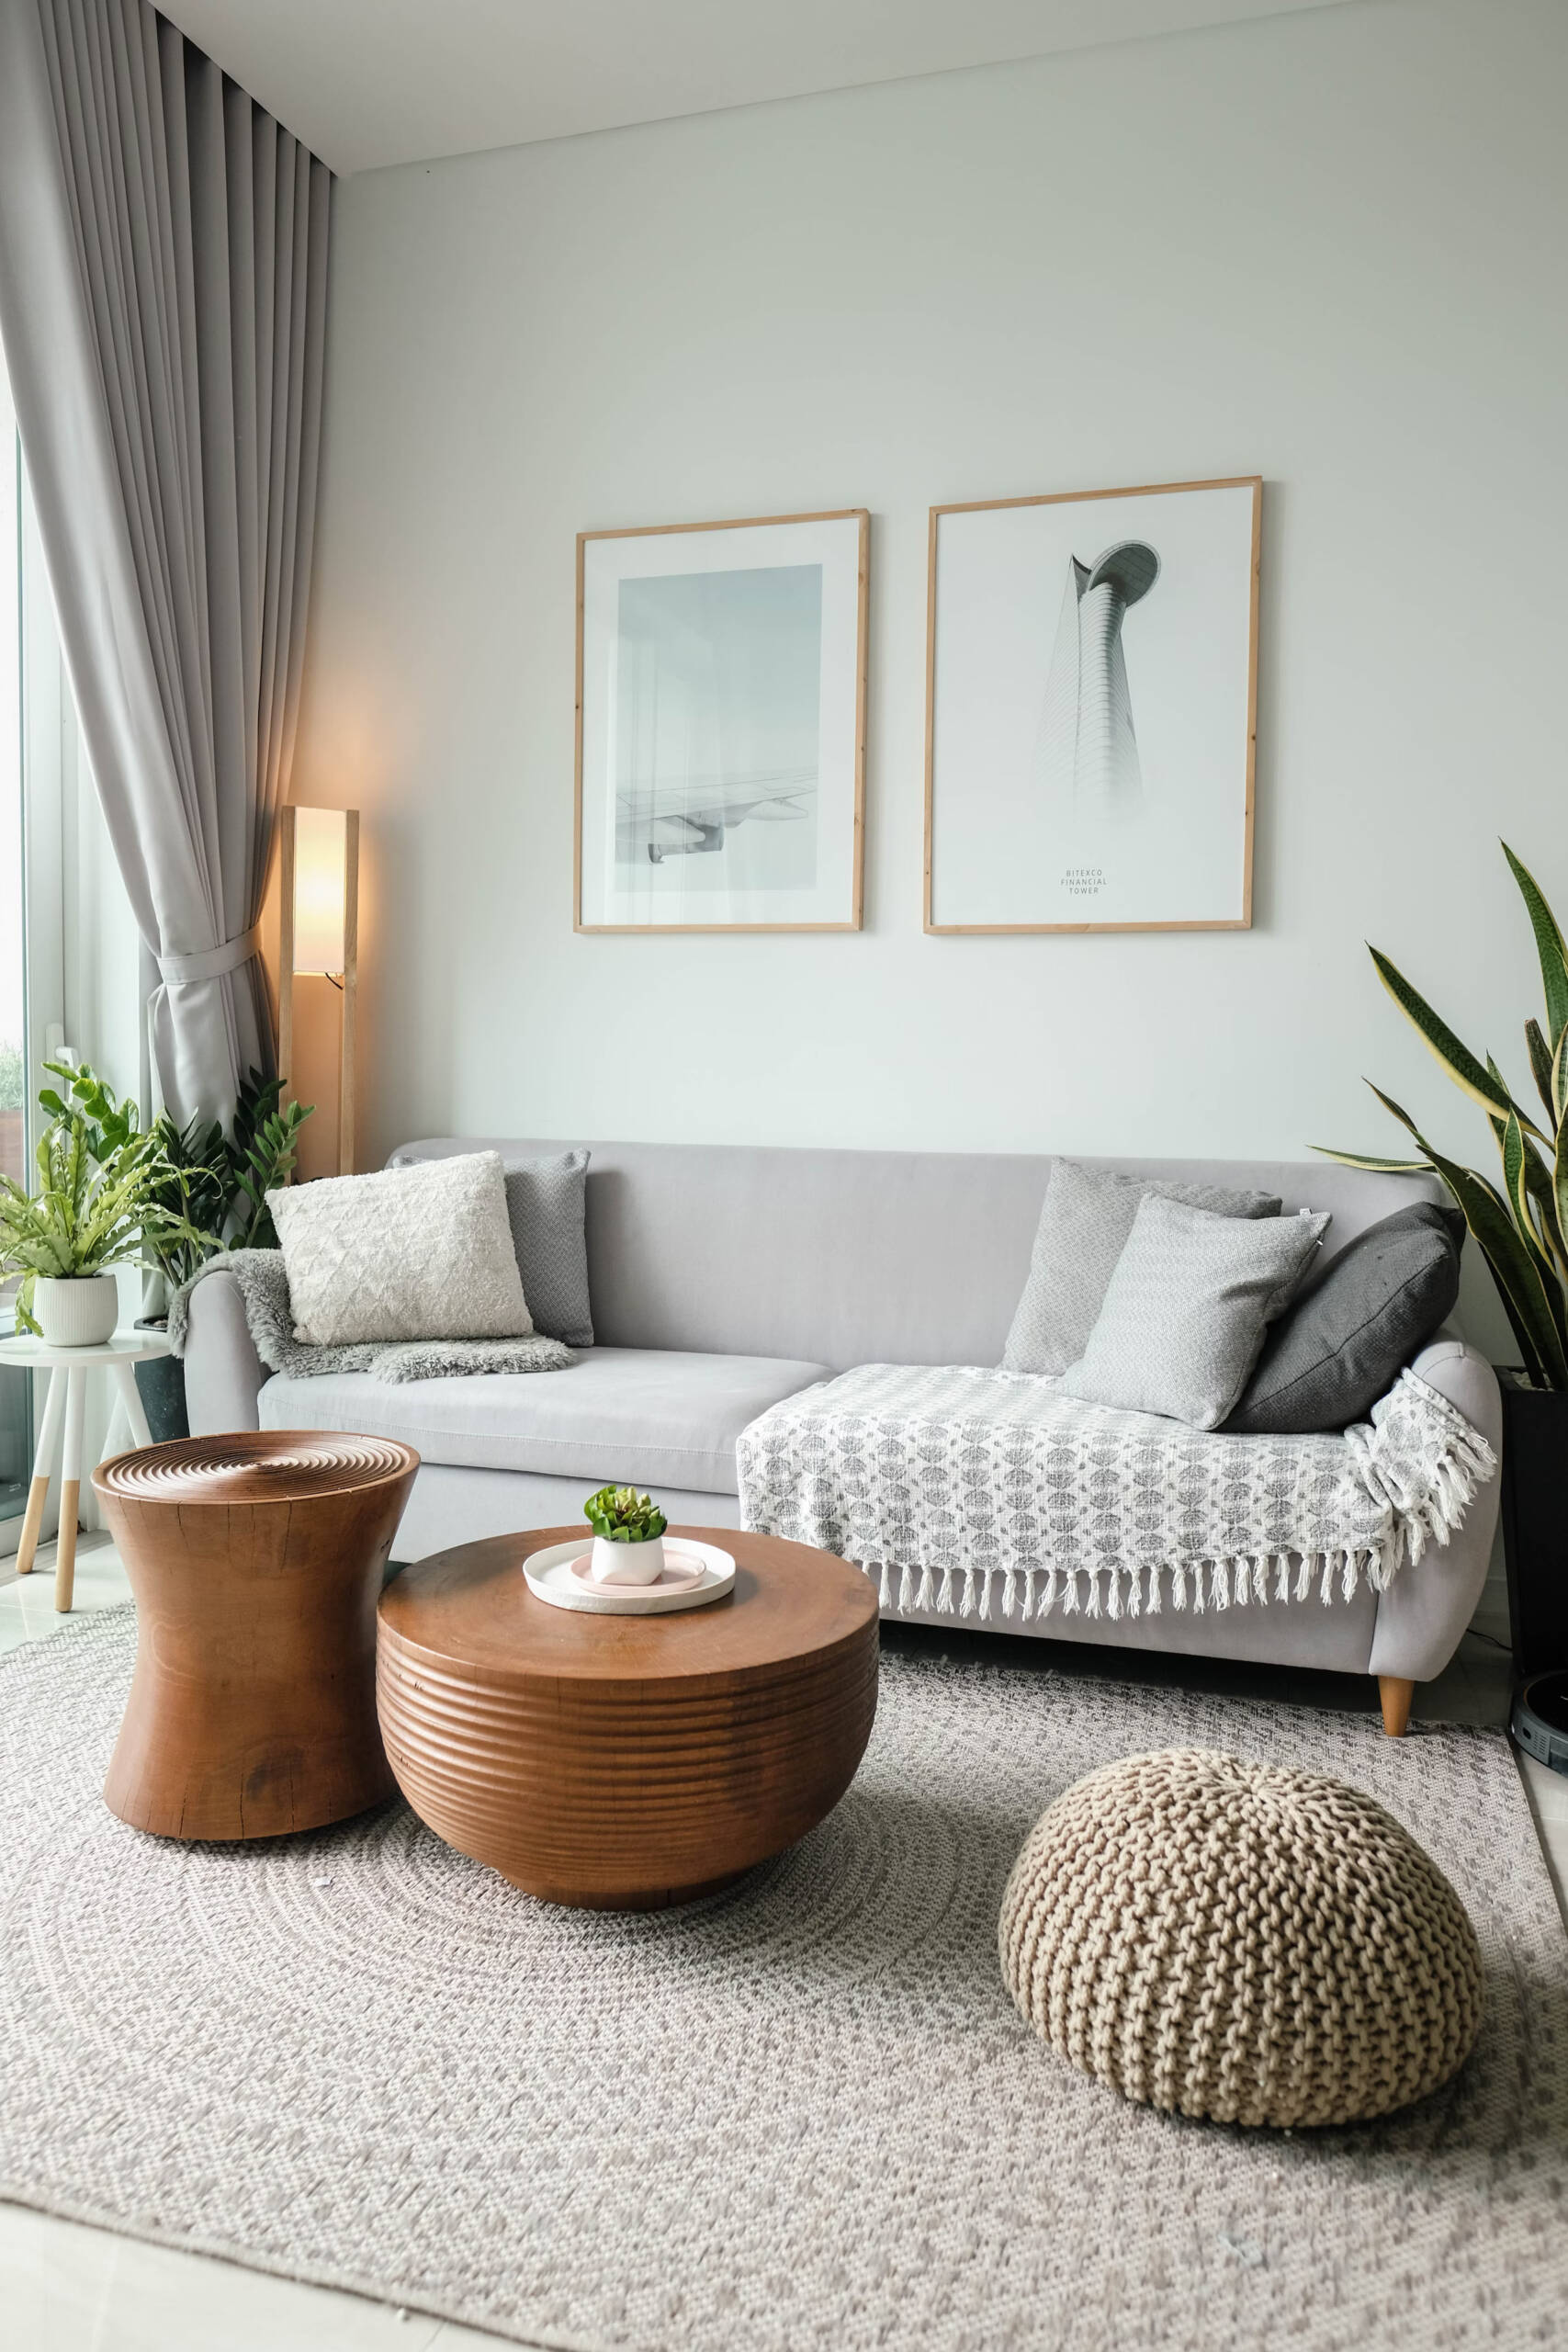 Minimalist Living Room Decor Embrace Simplicity and Elegance in Your Space